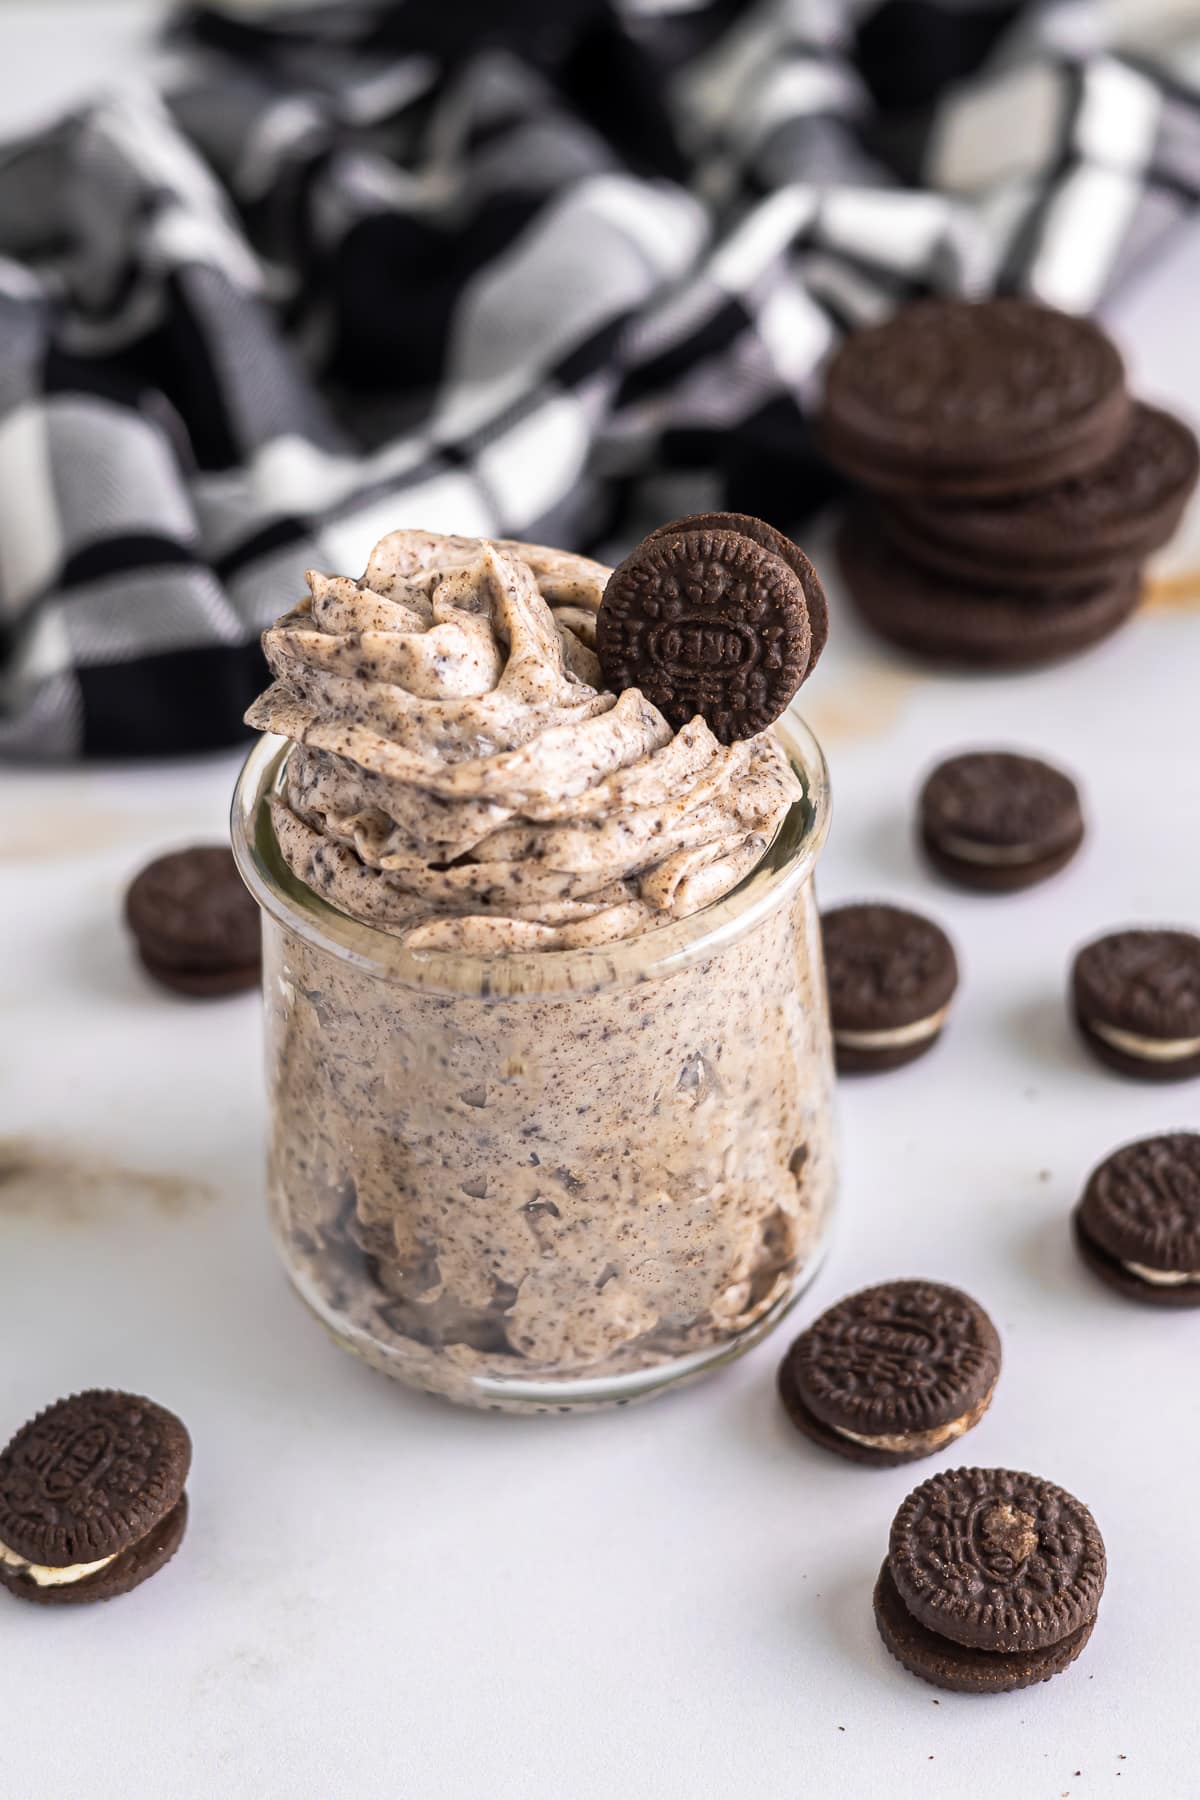 oreo buttercream frosting in a small glass jar